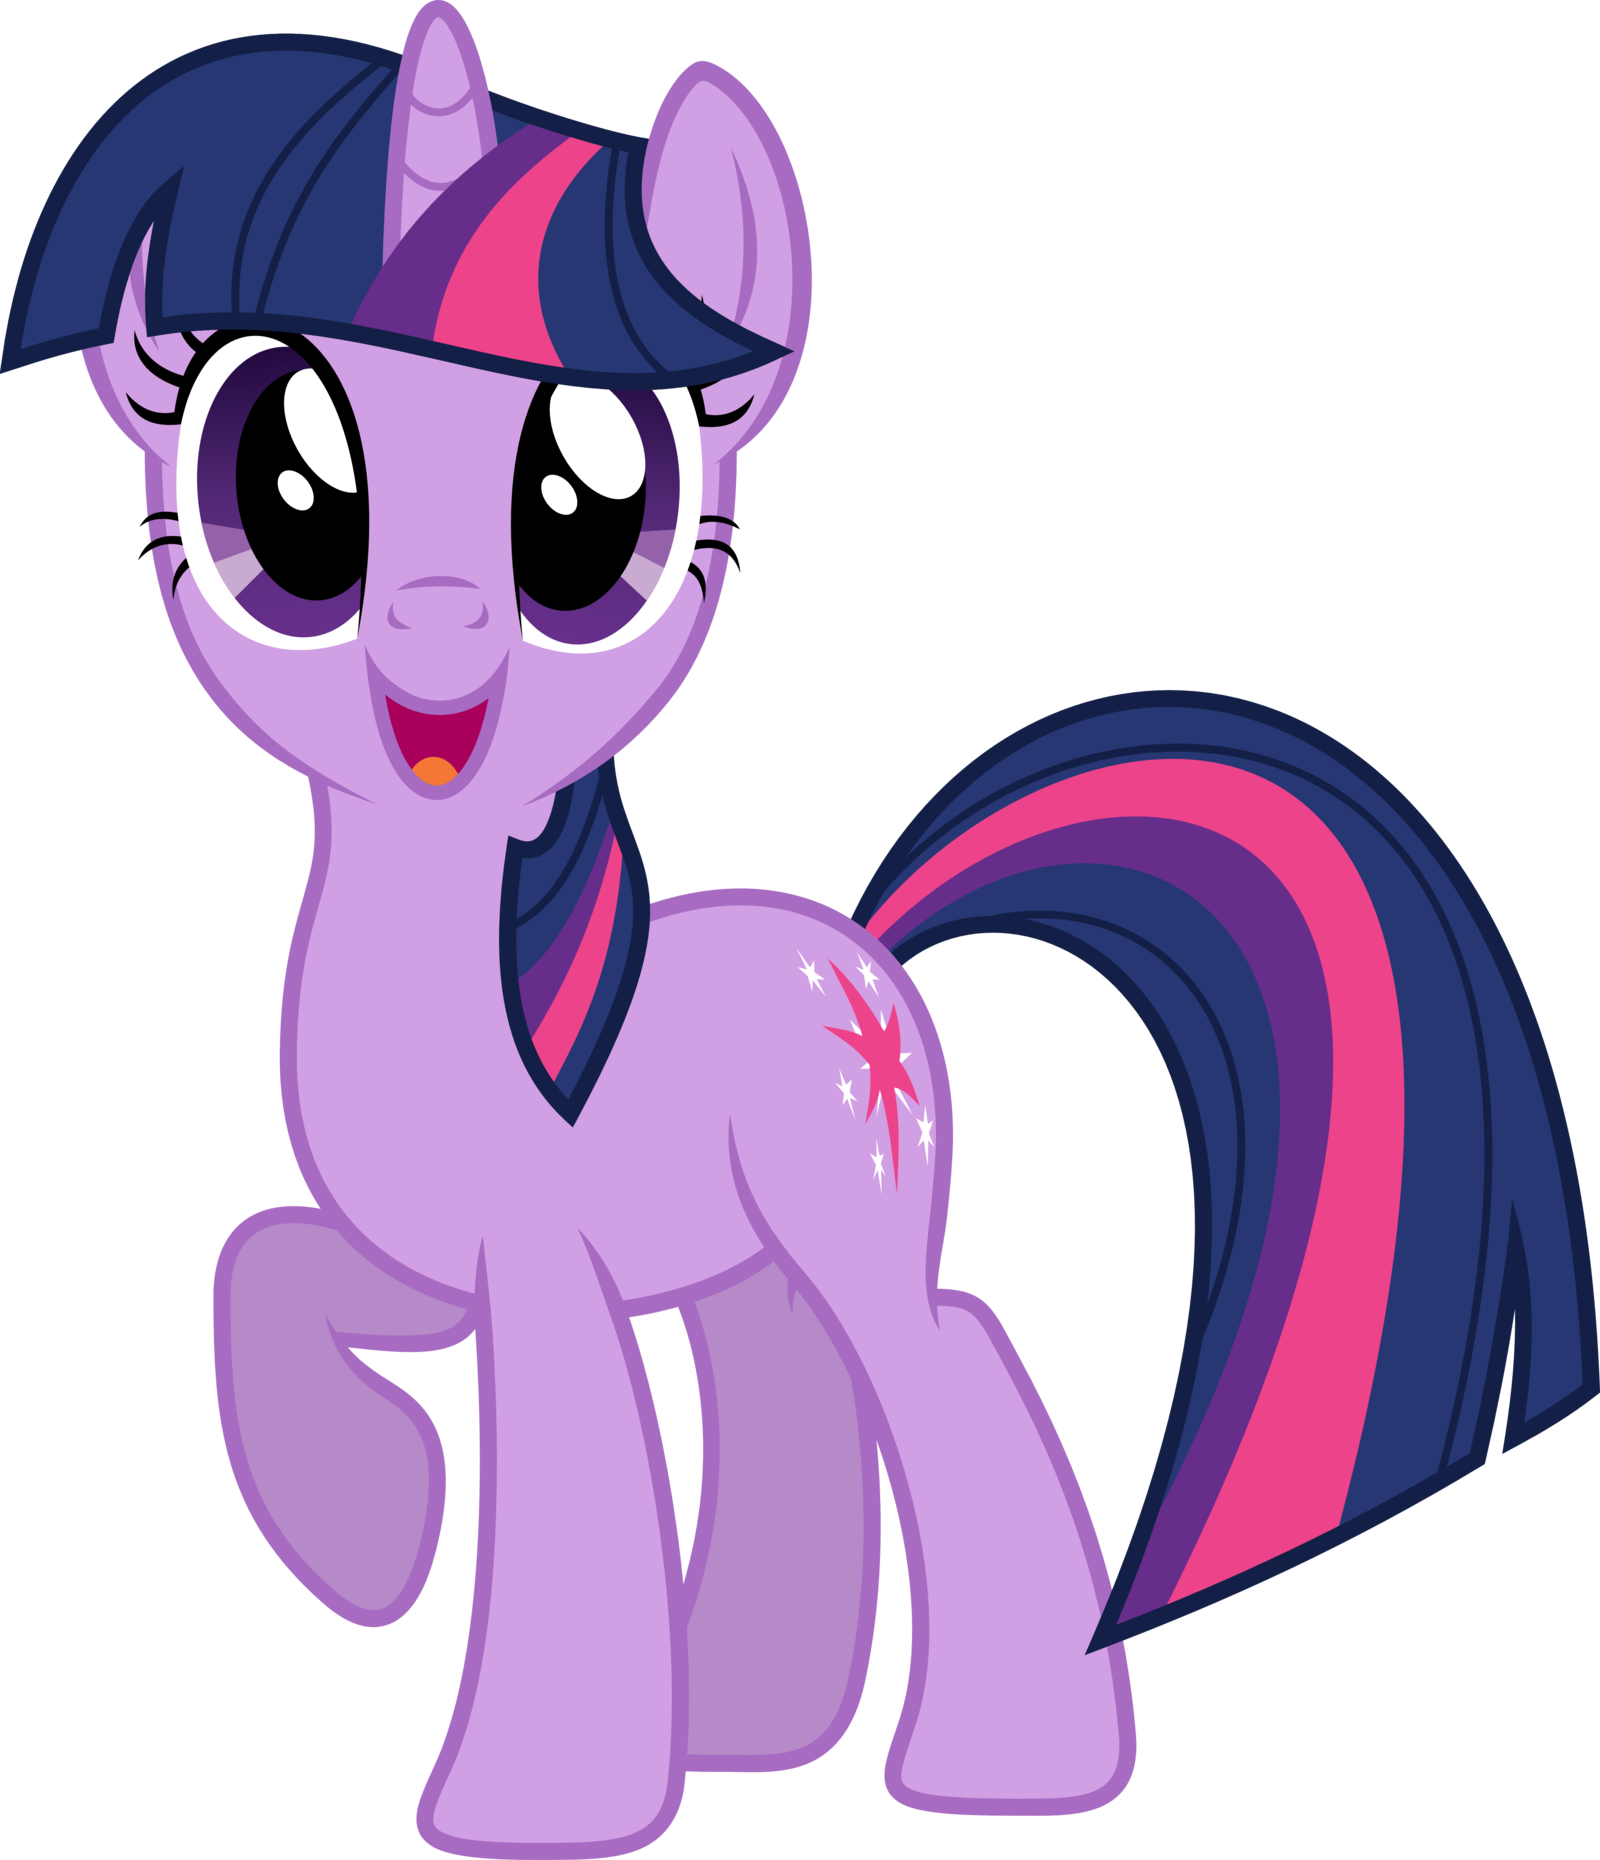 Twilight Sparkle 13 By Xpesifeindx.deviantart Pluspng.com On @. Pony Partytwilight Sparklemlpraritybirthday Hdpng.com  - My Little Pony, Transparent background PNG HD thumbnail